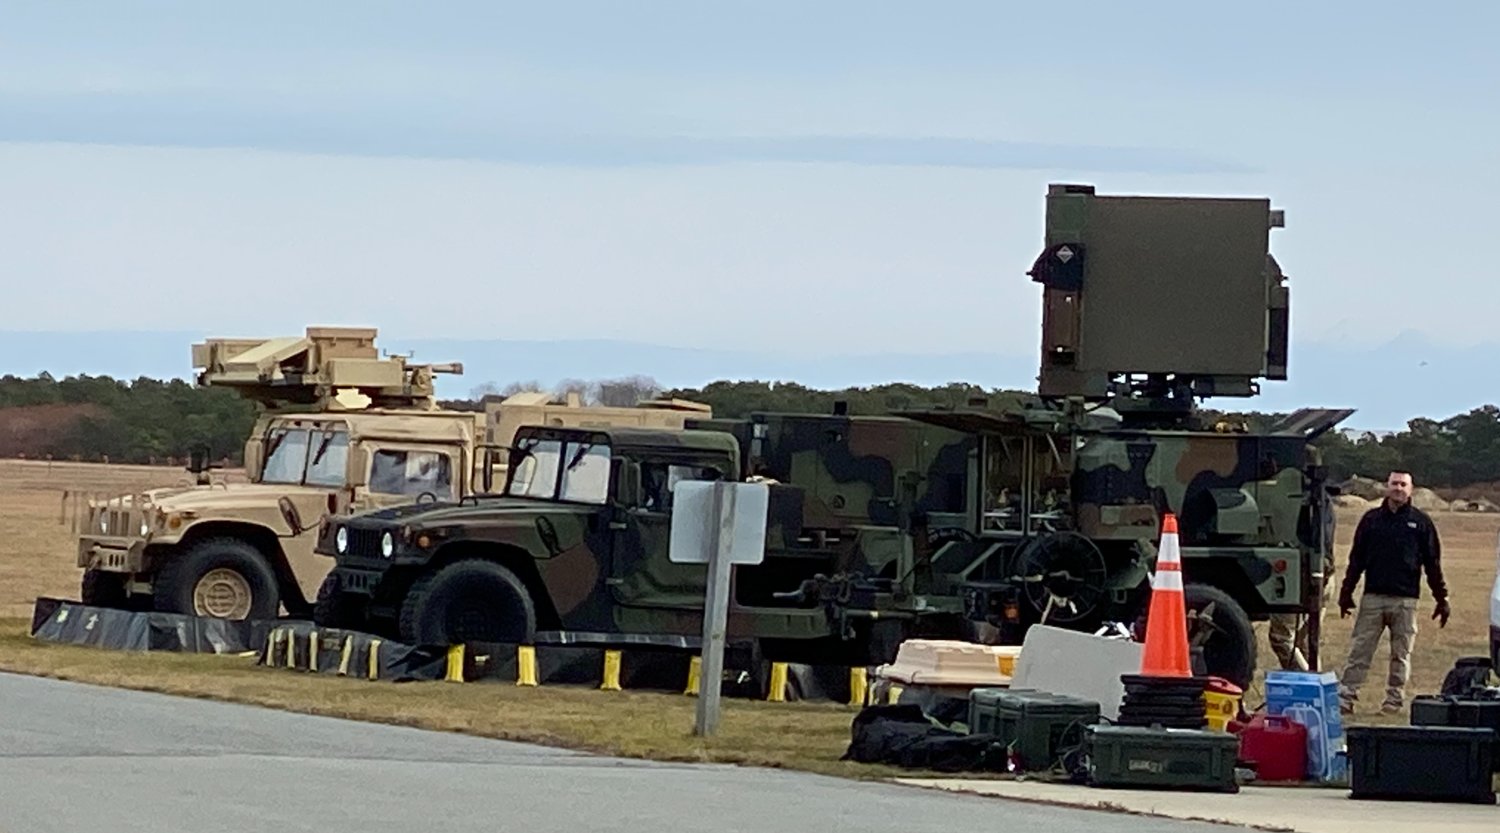 Military vehicles and equipment staged at Nantucket Memorial Airport Sunday morning.